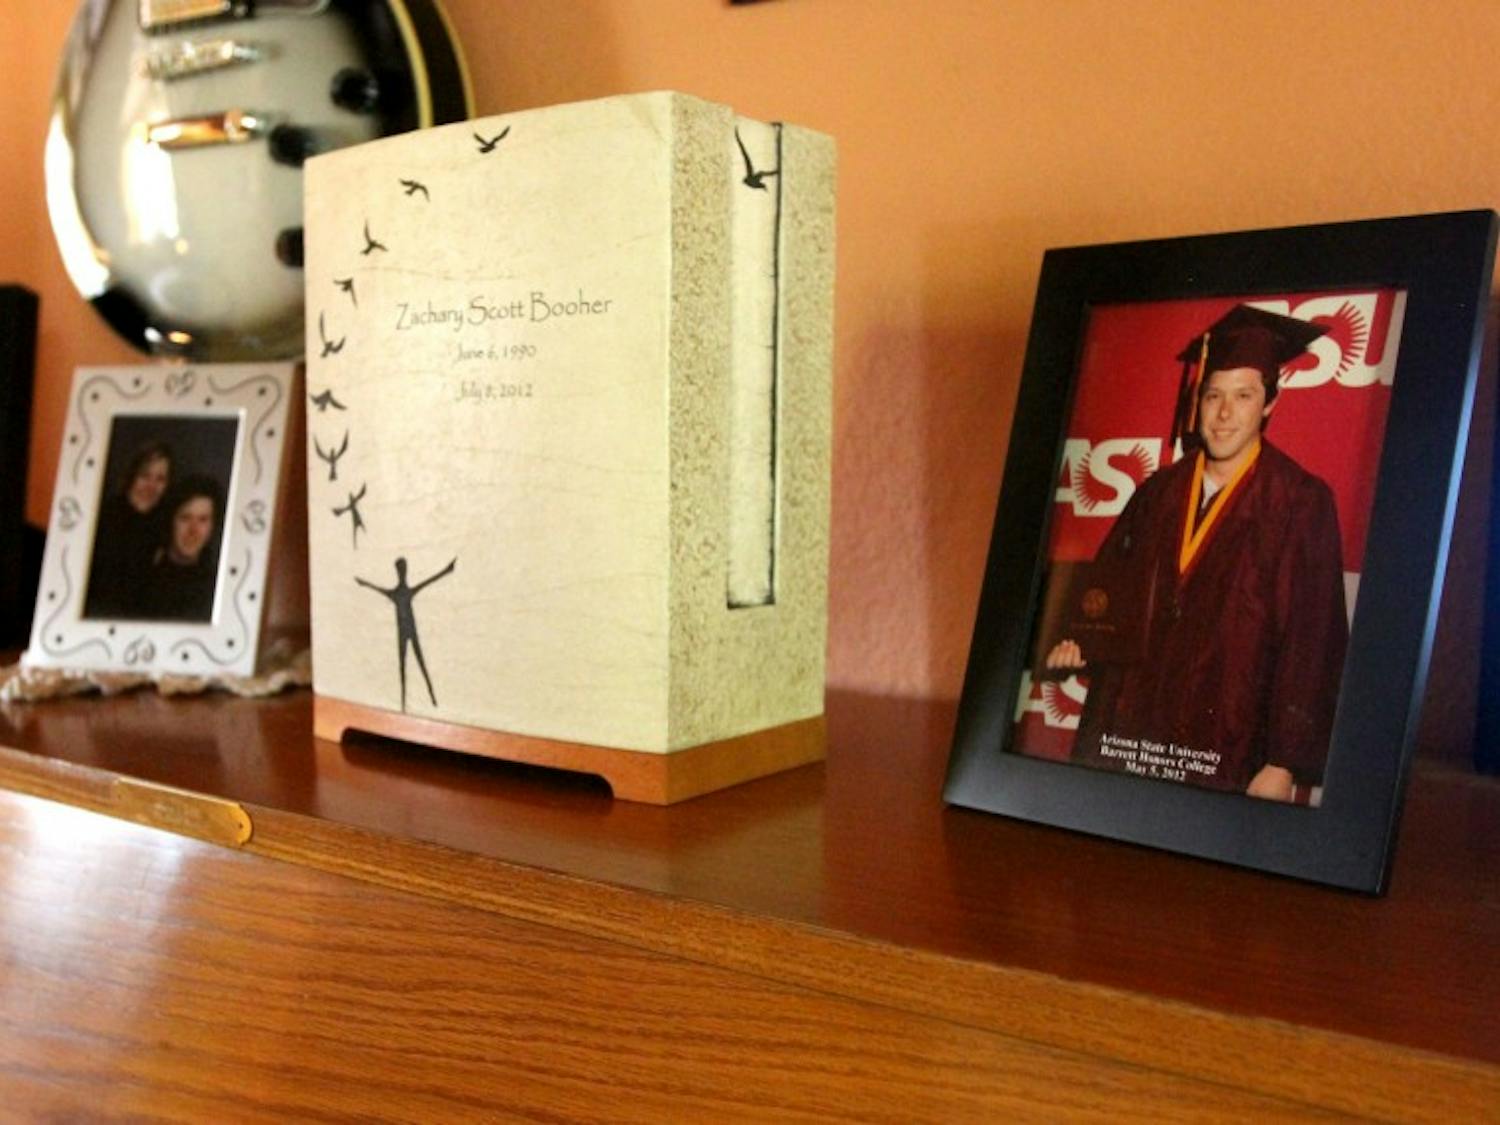 A piano in the Booher household holds photos and Zach's ashes. (photo by Yvonne Gonzalez)